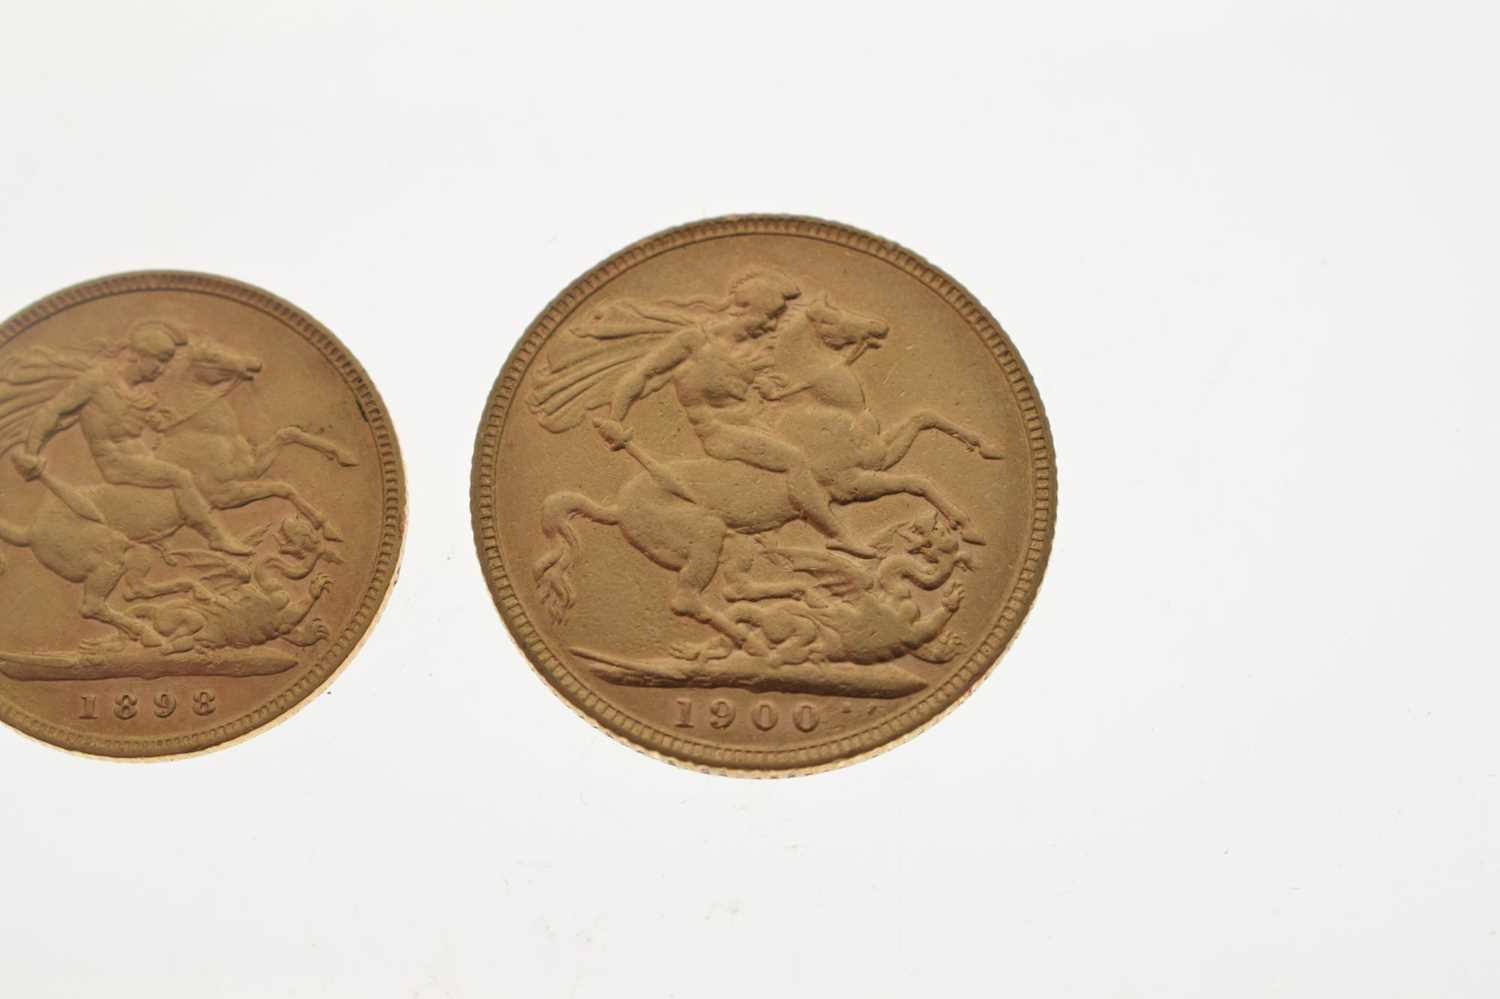 Queen Victoria gold sovereign, 1900, and a gold half sovereign, 1848 - Image 2 of 7